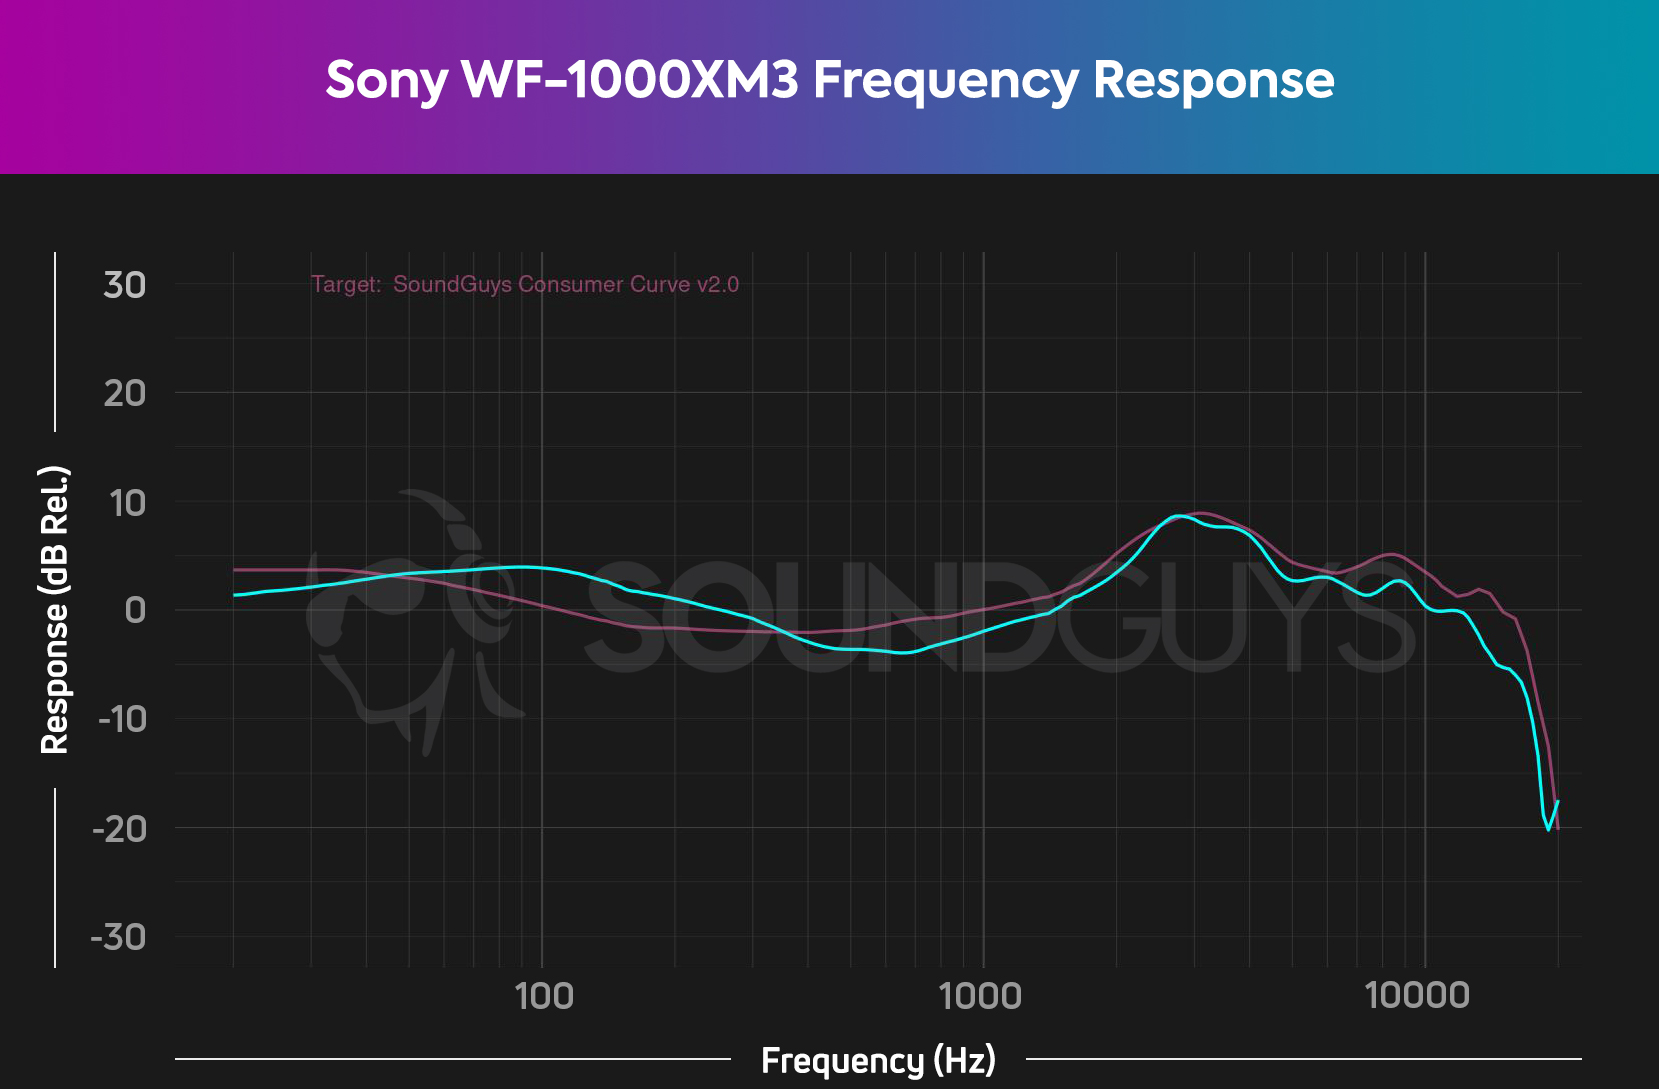 A frequency response chart for the Sony WF-1000XM3 (cyan) noise canceling true wireless earbuds, which shows output that deviates from our consumer curve V2 (pink), particularly with midrange and treble reproduction.